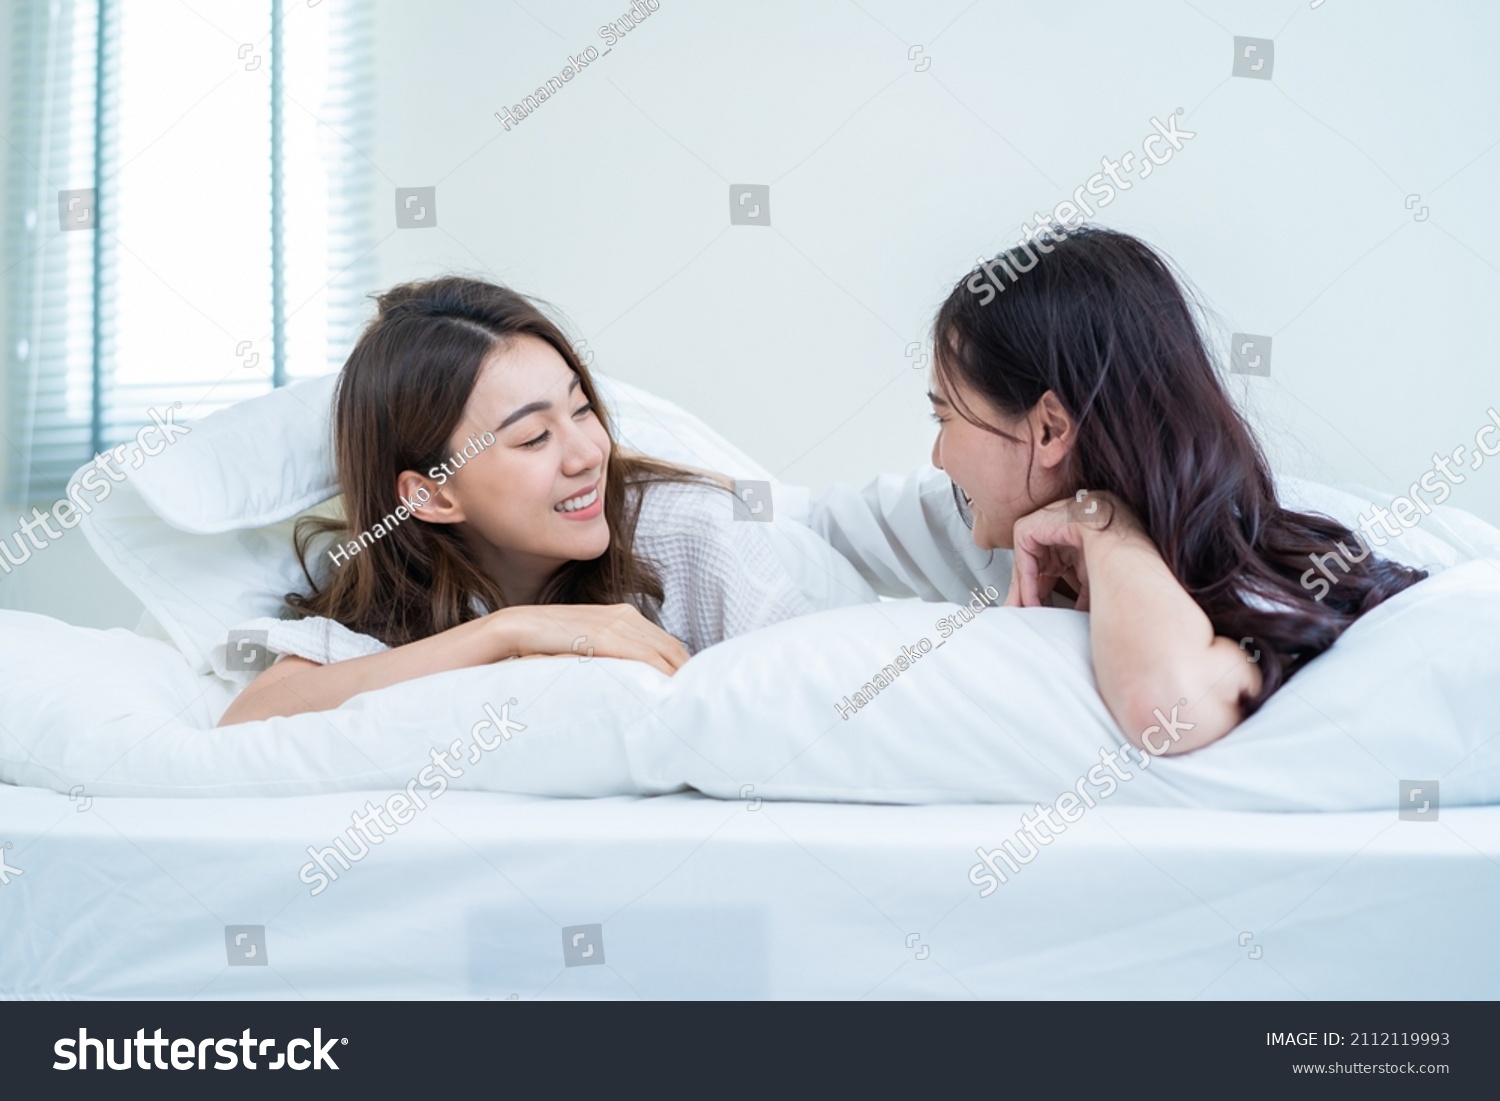 Lesbians Playing With Eachother